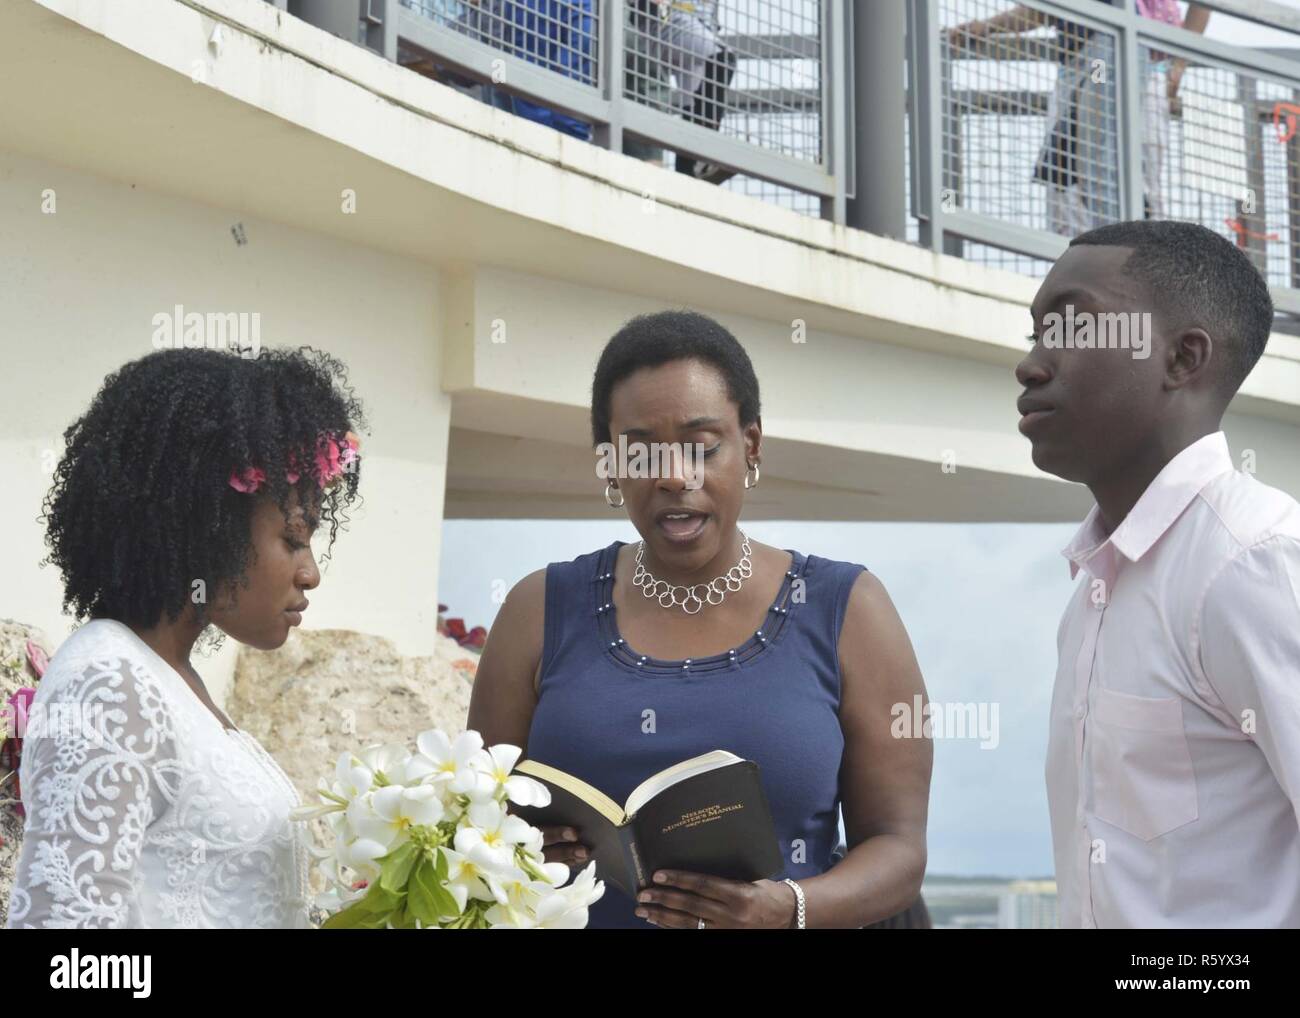 TAMUNING, Guam (April 23, 2017) Lt. Takana Jefferson, a Protestant/gospel chaplain stationed on submarine tender USS Emory S. Land (AS 39), officiates a wedding ceremony for Electronics Technician 2nd Class Kiontre Daniels, also assigned to Land, and Ti'roynei Jones at Two Lovers Point in Tamuning Guam April 23. Apra Harbor, Guam, is homeport to four forward-deployed submarines and both of the U.S. Navy's submarine tenders, which are maintained as part of the Navy's forward-deployed submarine force and arereadily capable of meeting global operational requirements Stock Photo